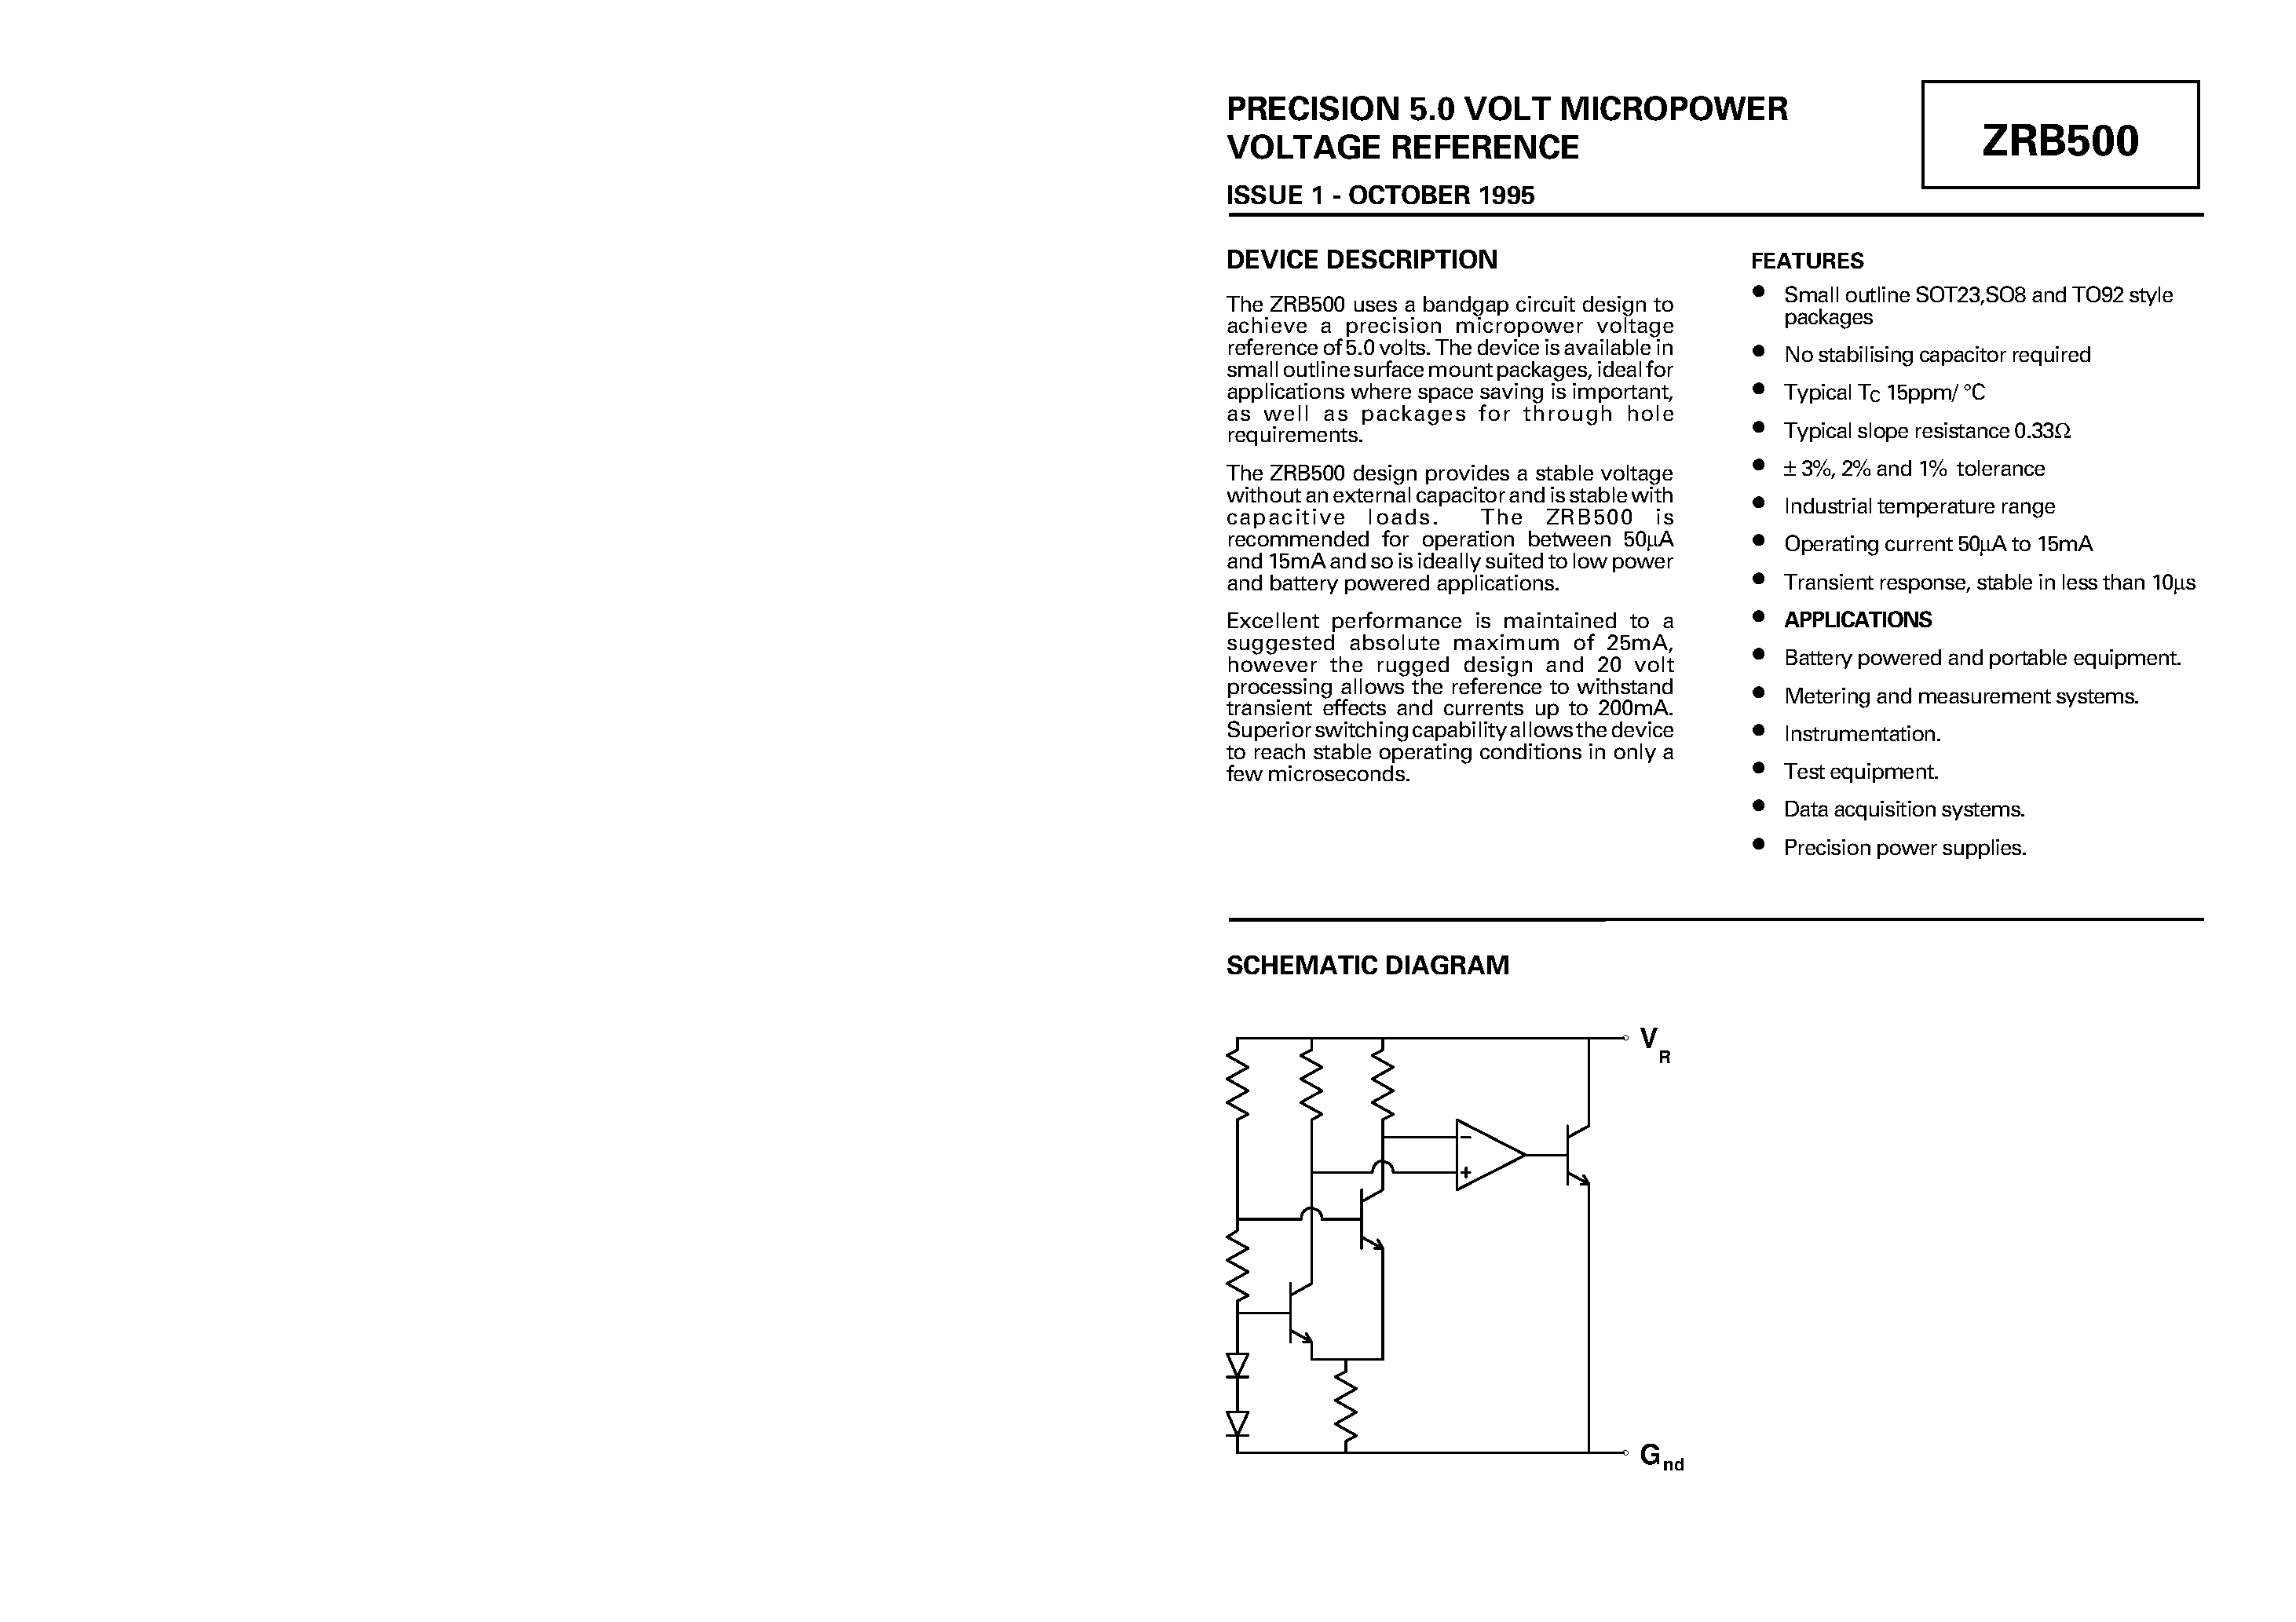 Datasheet ZRB500N802 - PRECISION 5.0 VOLT MICROPOWER VOLTAGE REFERENCE page 1